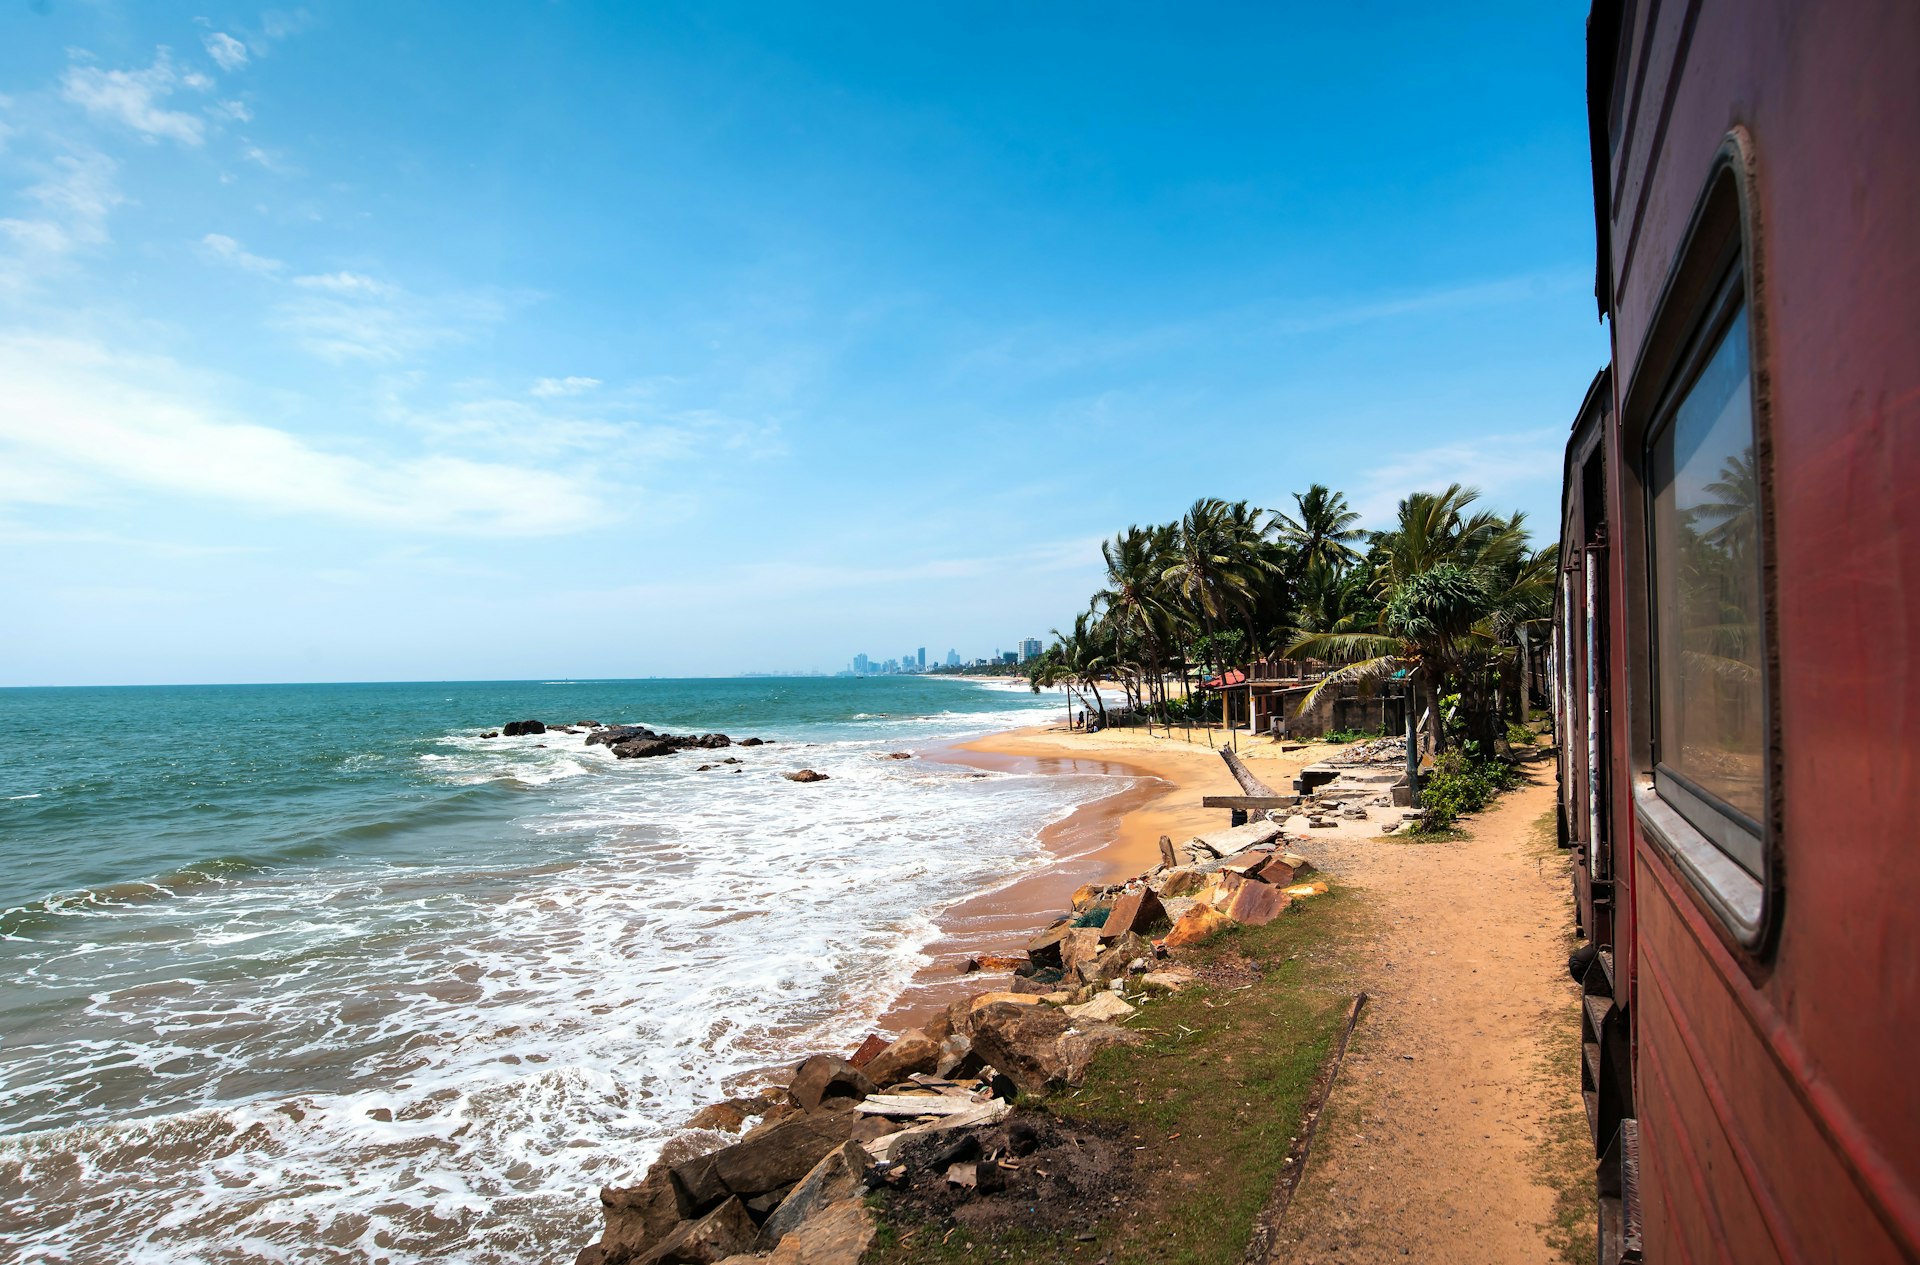 A parallel view of a red train travelling from Colombo to Galle, taken by a passenger on board the train. The tracks runs alongside the coast, with the sea coming right up to the tracks. A small, palm tree-backed beach is visible in the middle ground, while in the distance, the skyscrapers of a metropolis, presumably Colombo, can be seen.